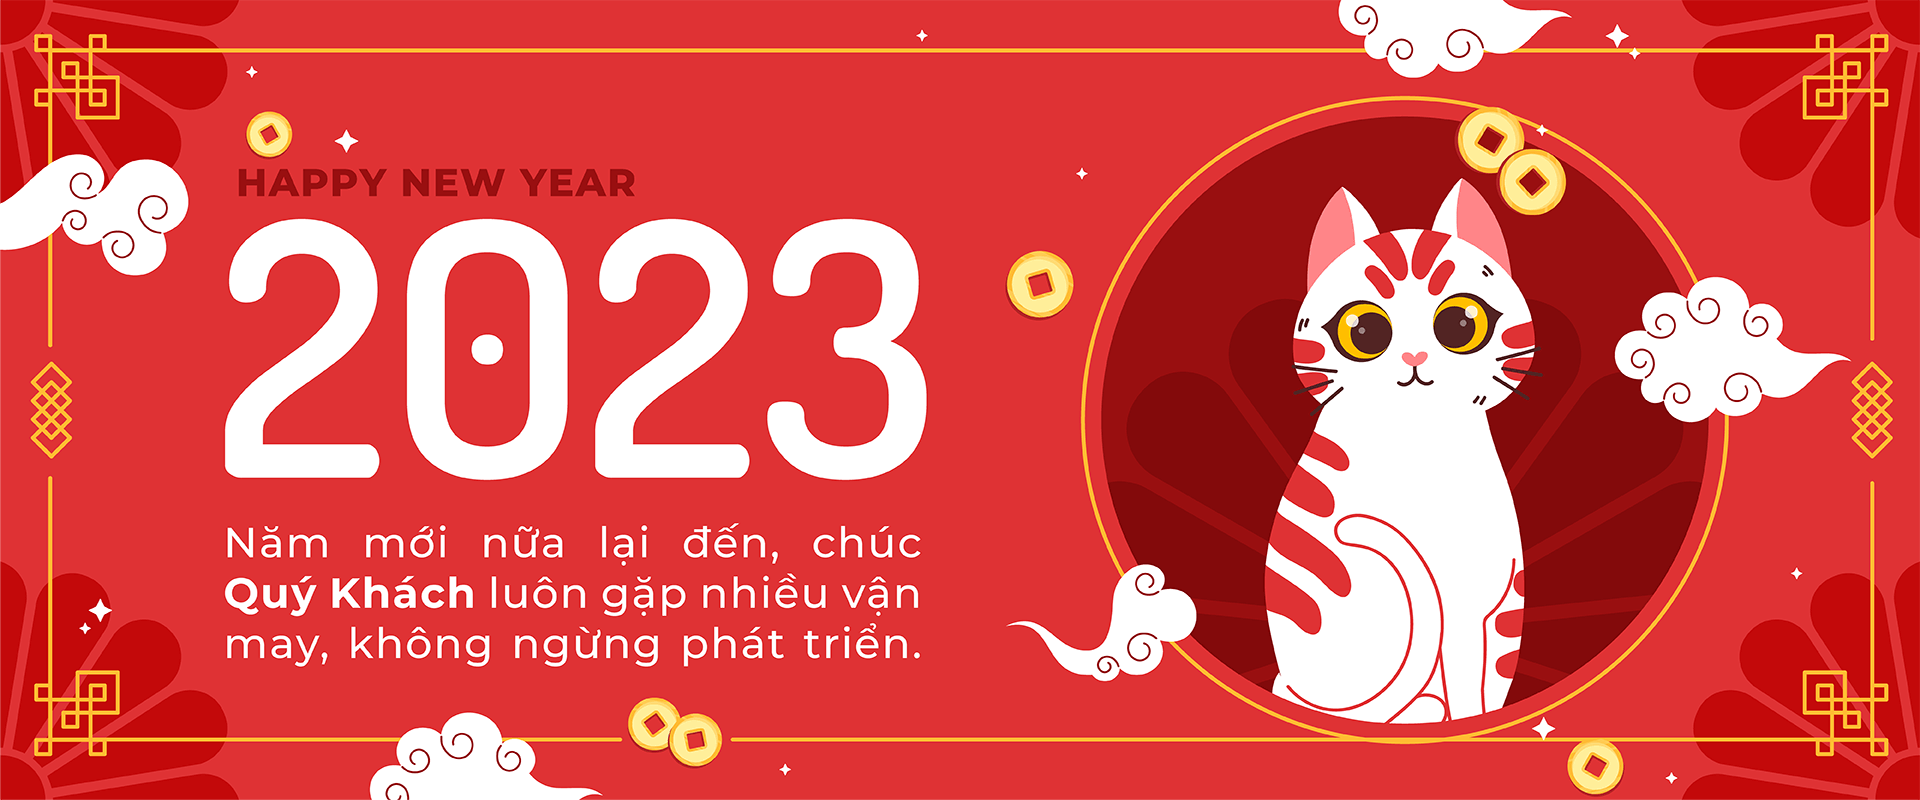 Tet holiday 2023 victory 4 - Thắng Lợi Victory